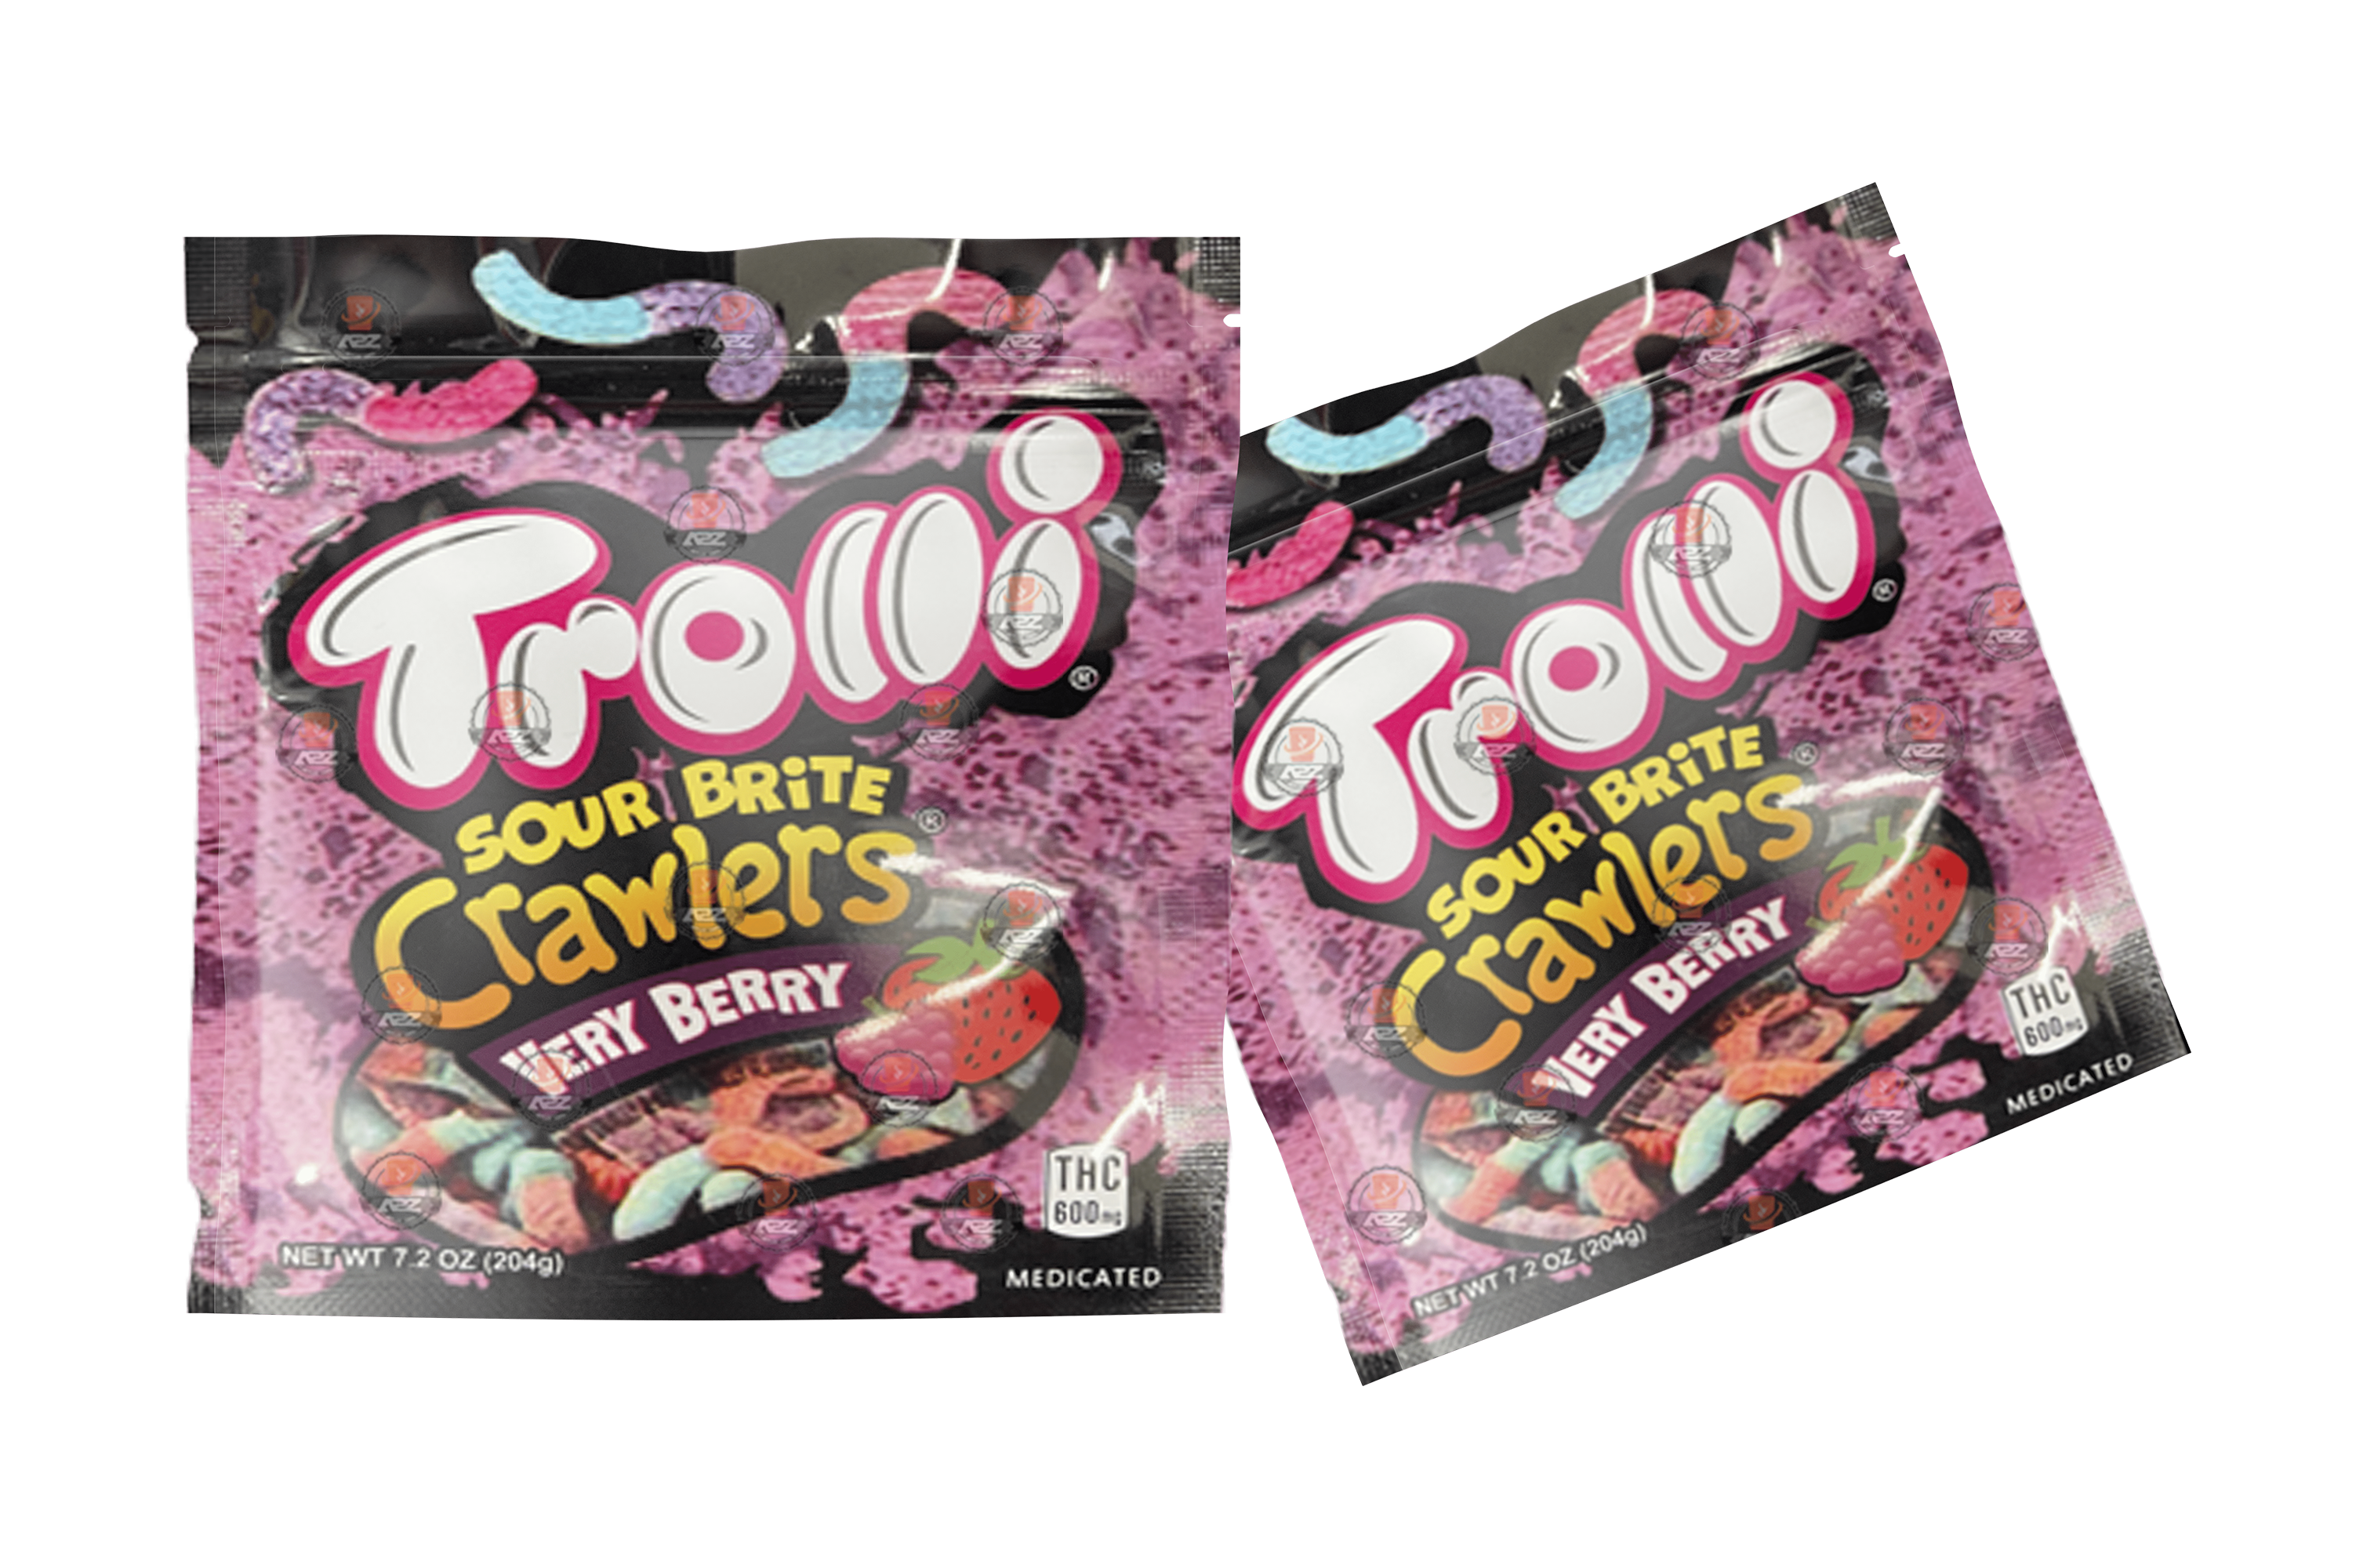 Trolli Sour Brite Crawlers Very Berry 600mg Mylar bags packaging only 3x3